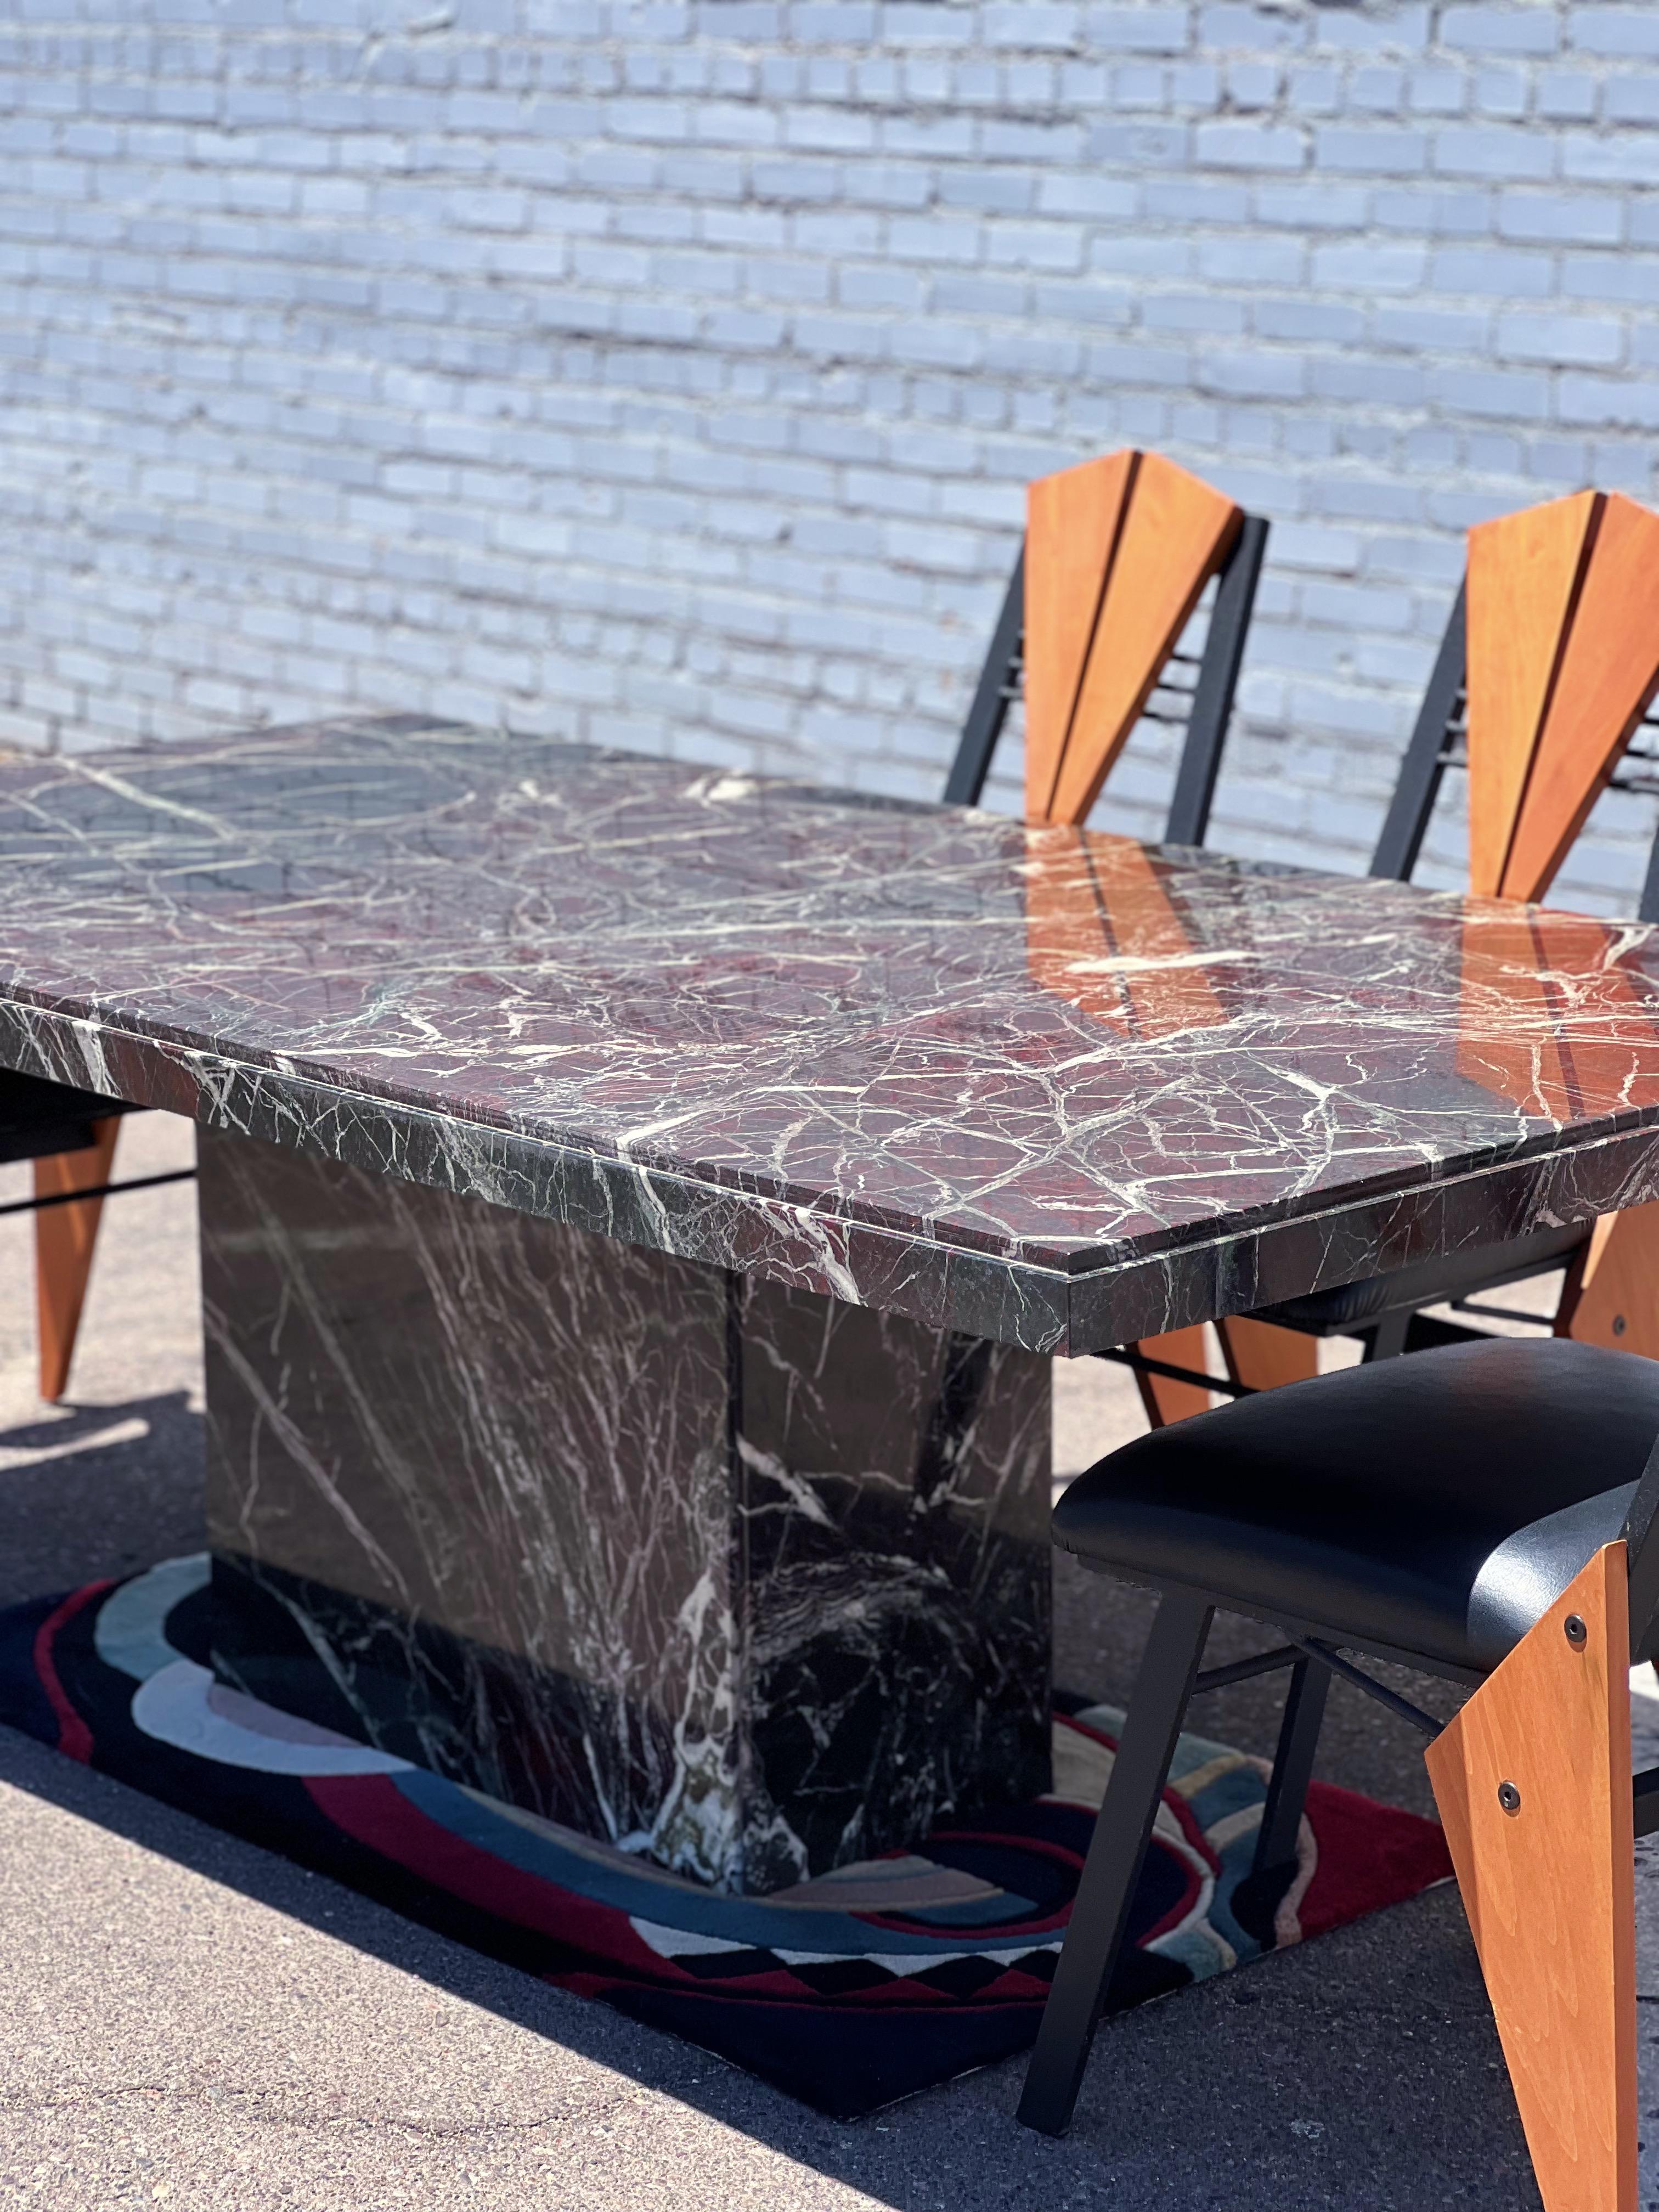 Exquisite piece of Rosso Levanto marble fabricated in Italy circa 1970's into a statement dining table. Incredible detail throughout. 

This piece brags areas of deep red, emerald green, and off-white veining that gives the table a look of texture